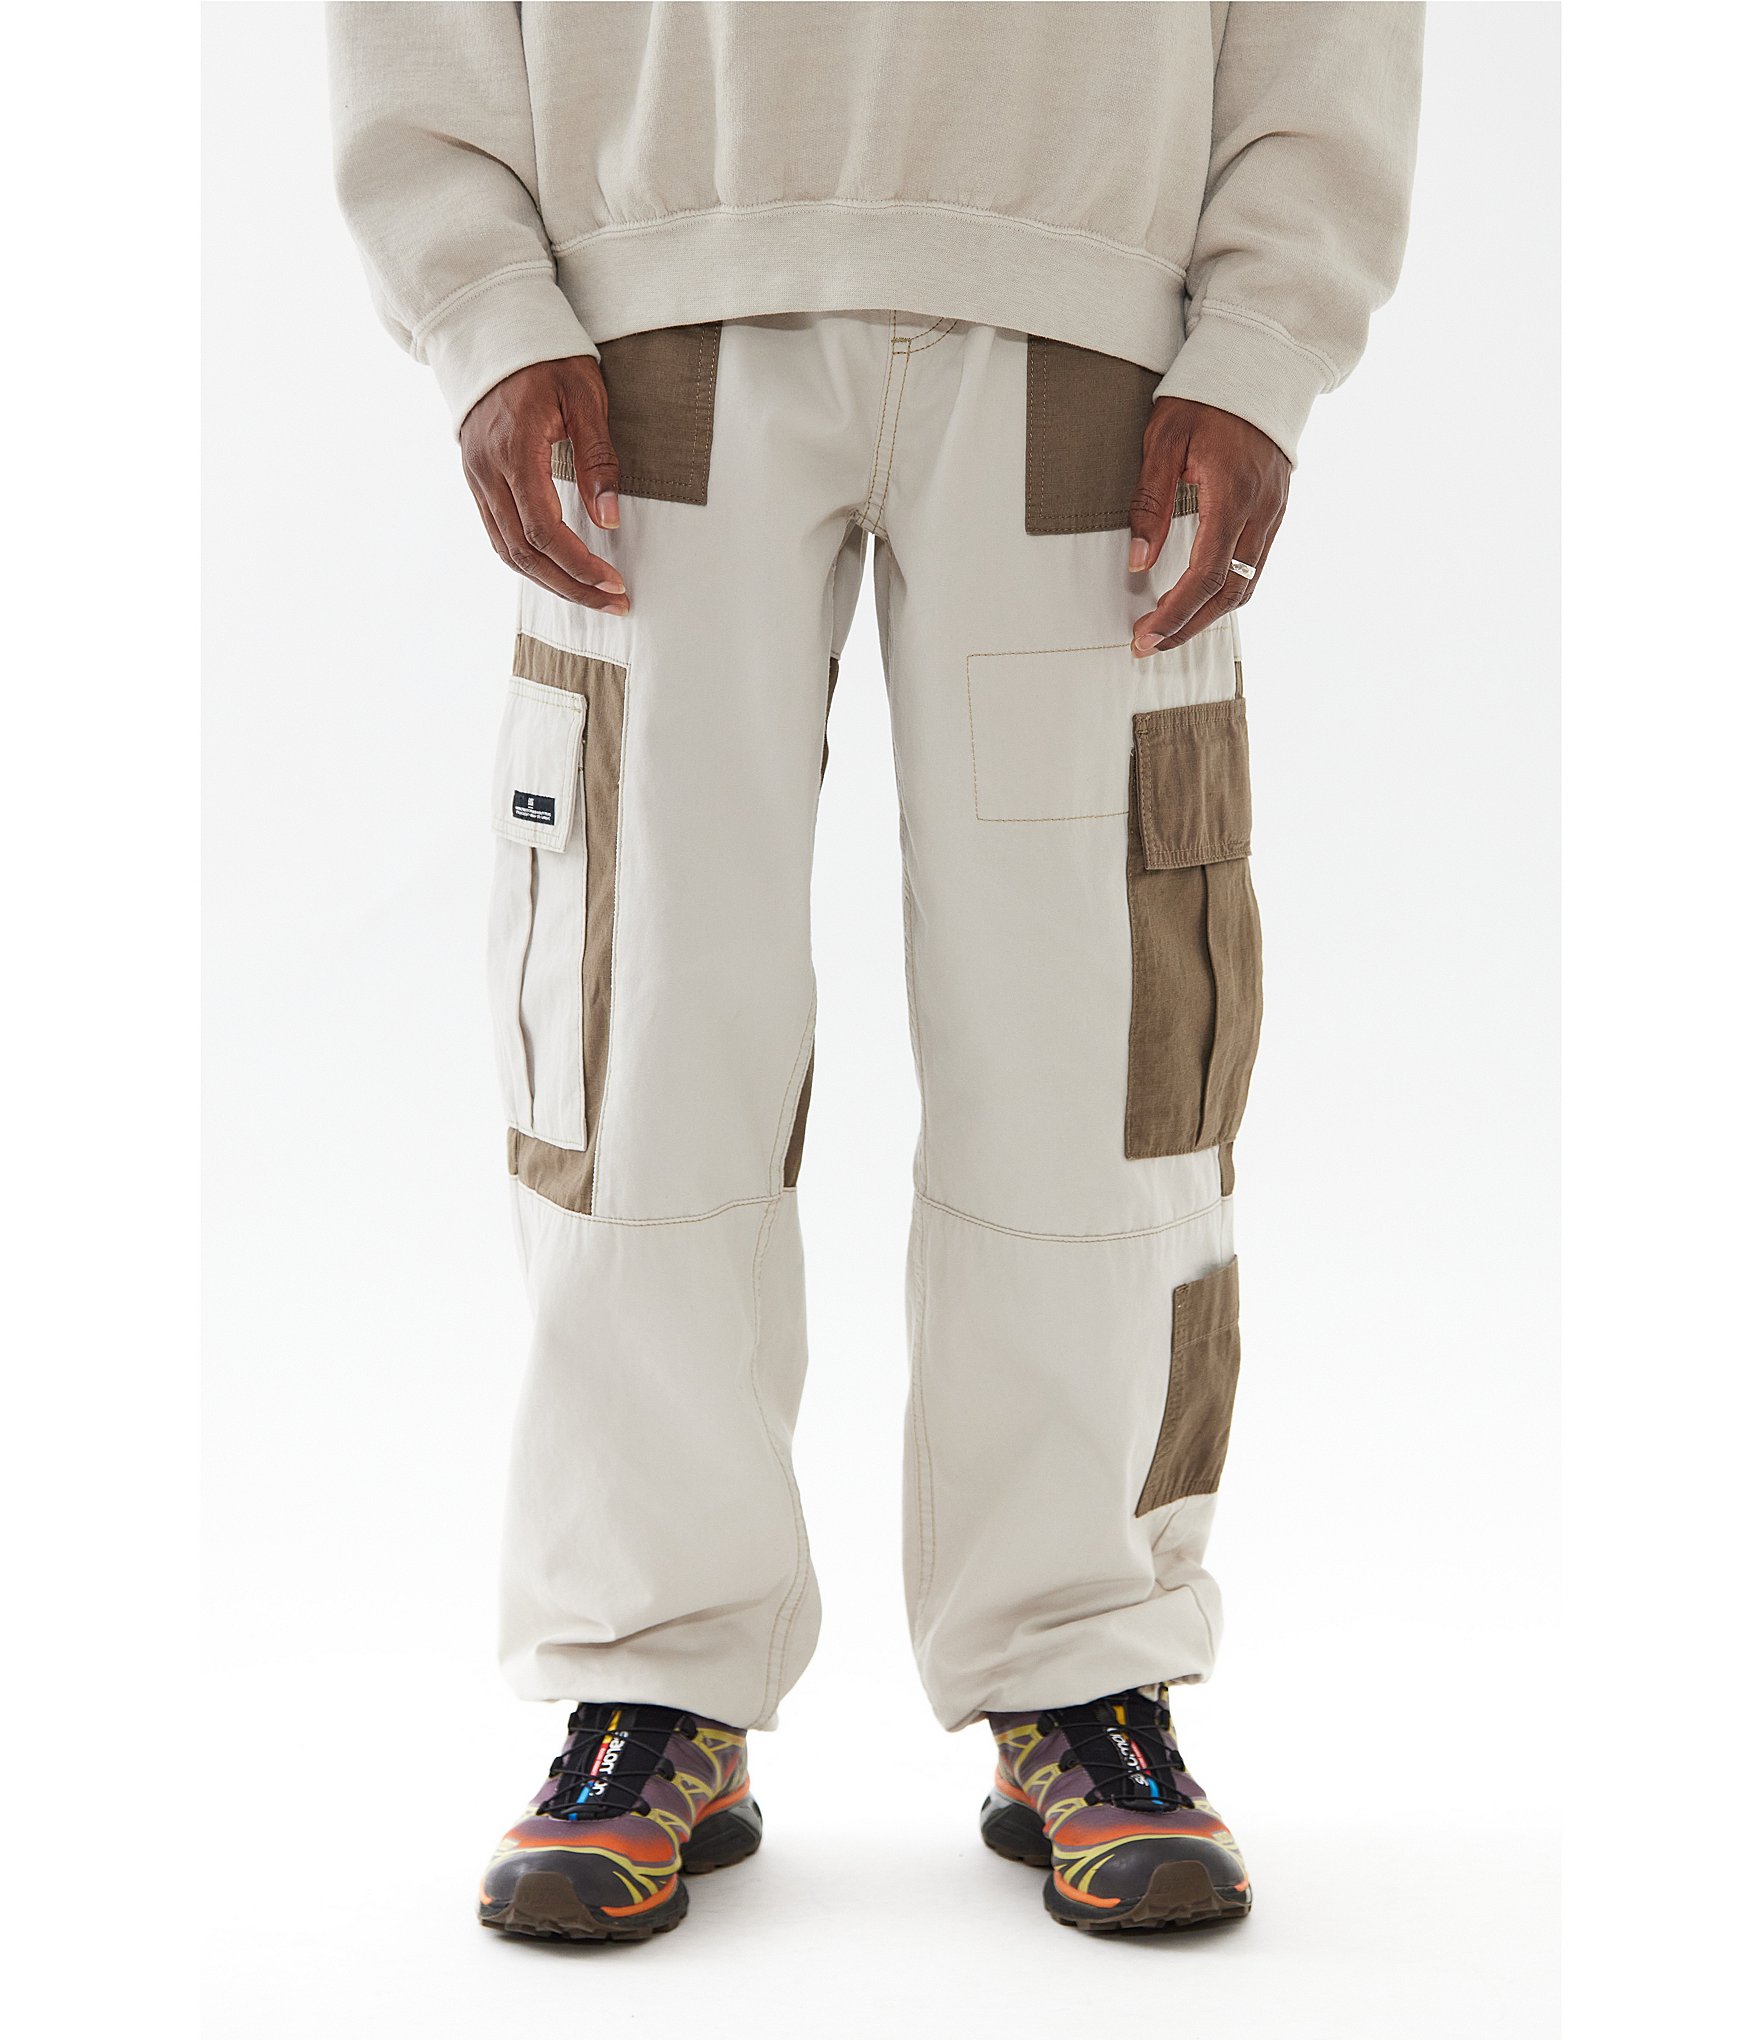 BDG Urban Outfitters Ripstop Utility Cargo Pants  Dillards